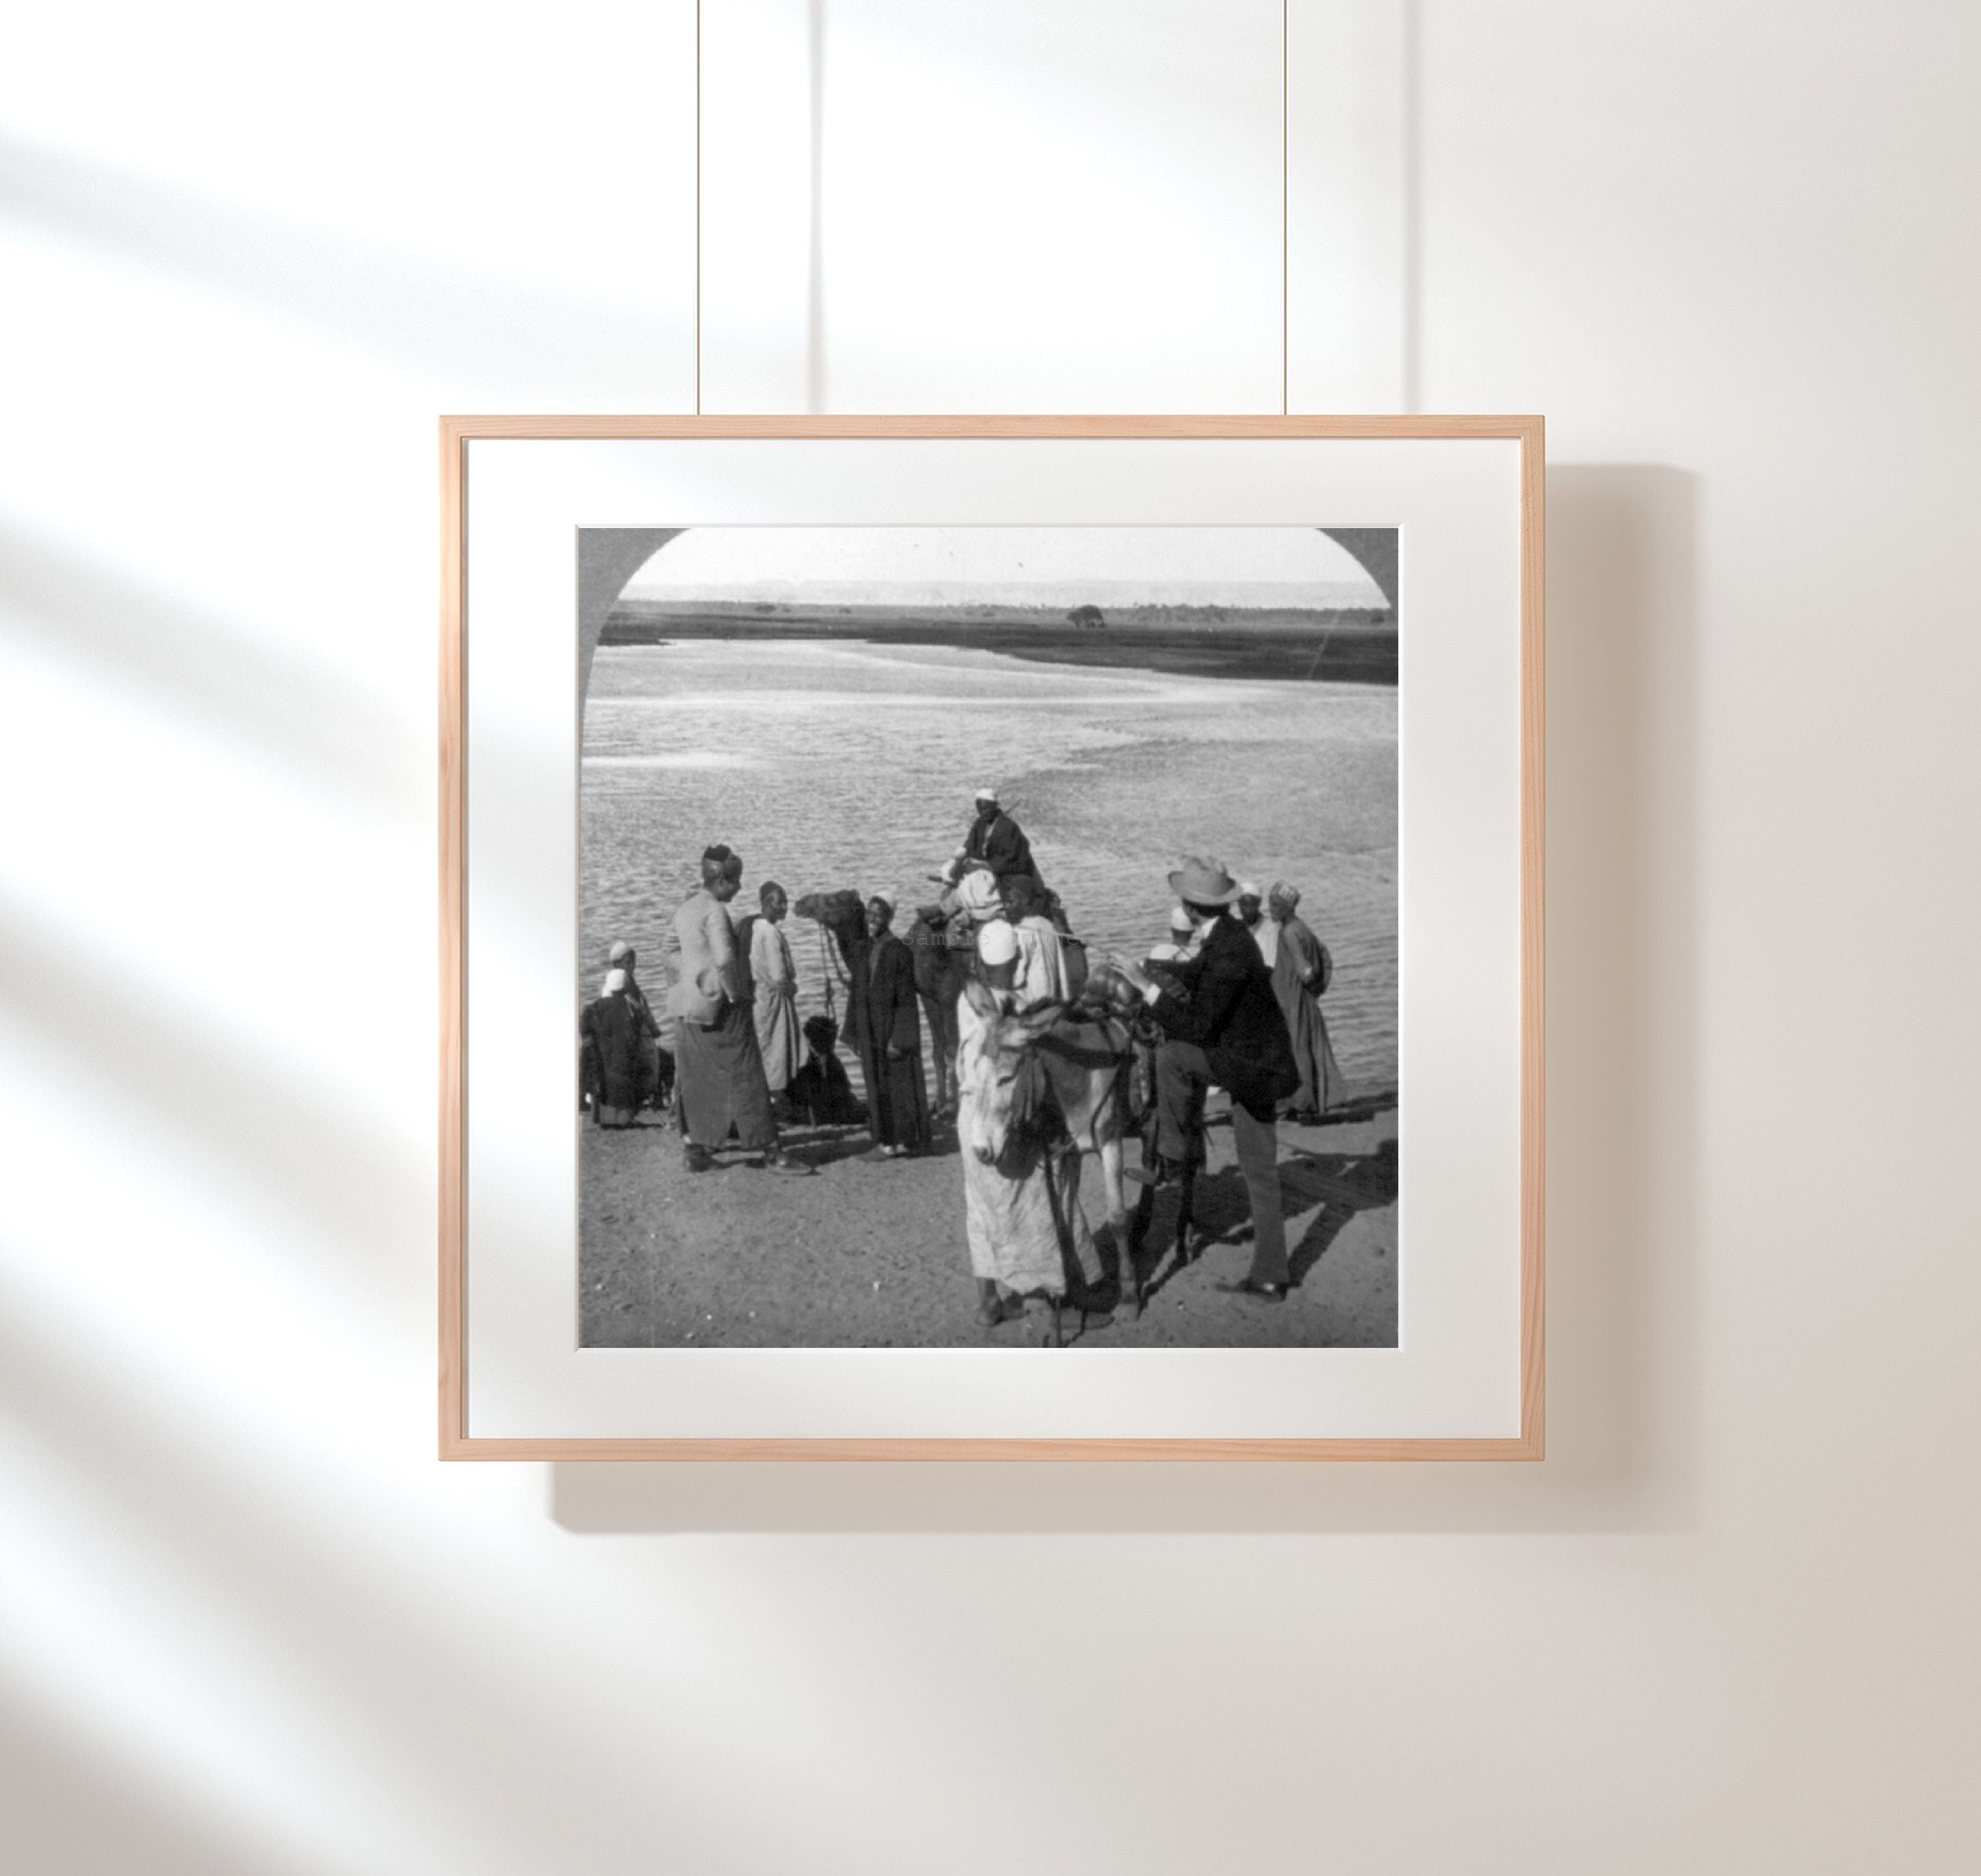 1905 Photo Inundation of the Nile, Egypt Group of people with camel and donkey i